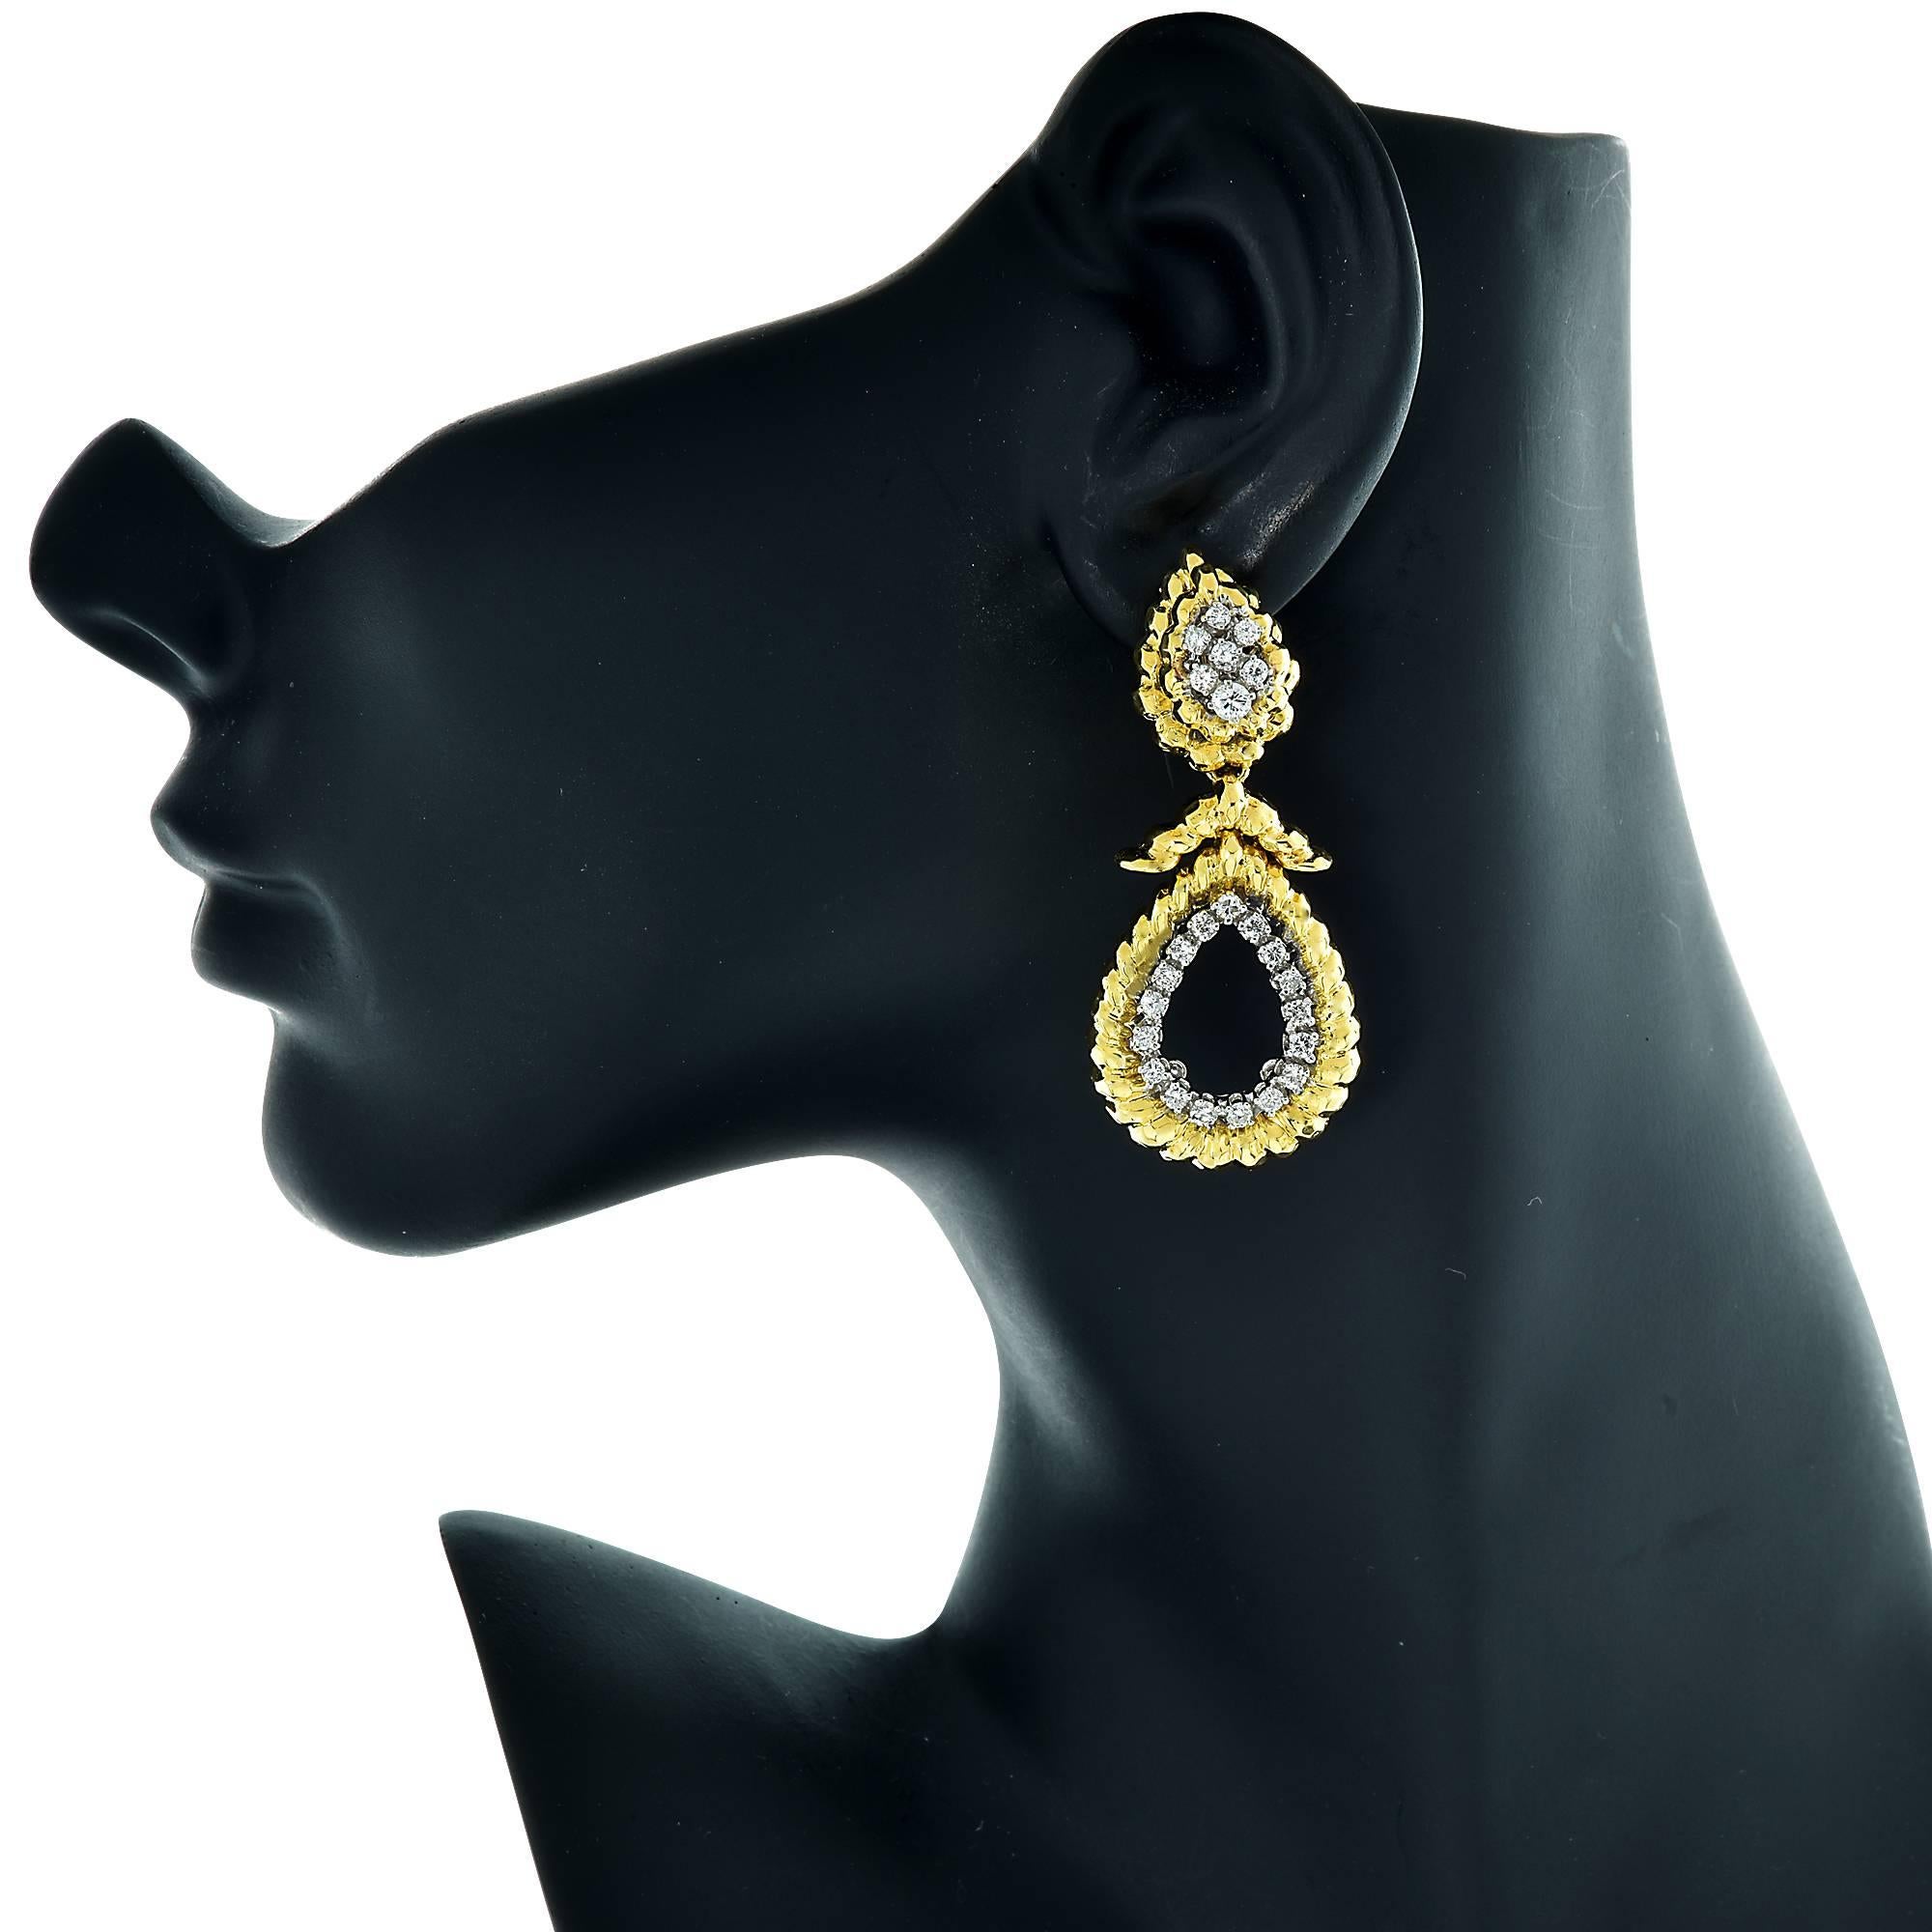 18k yellow and white gold earrings containing 48 round brilliant cut diamonds weighing approximately 1.60cts G color and SI clarity. These lever back earrings are beautiful and unique.

The earrings measure 54mm in length by 24mm in width.
It is